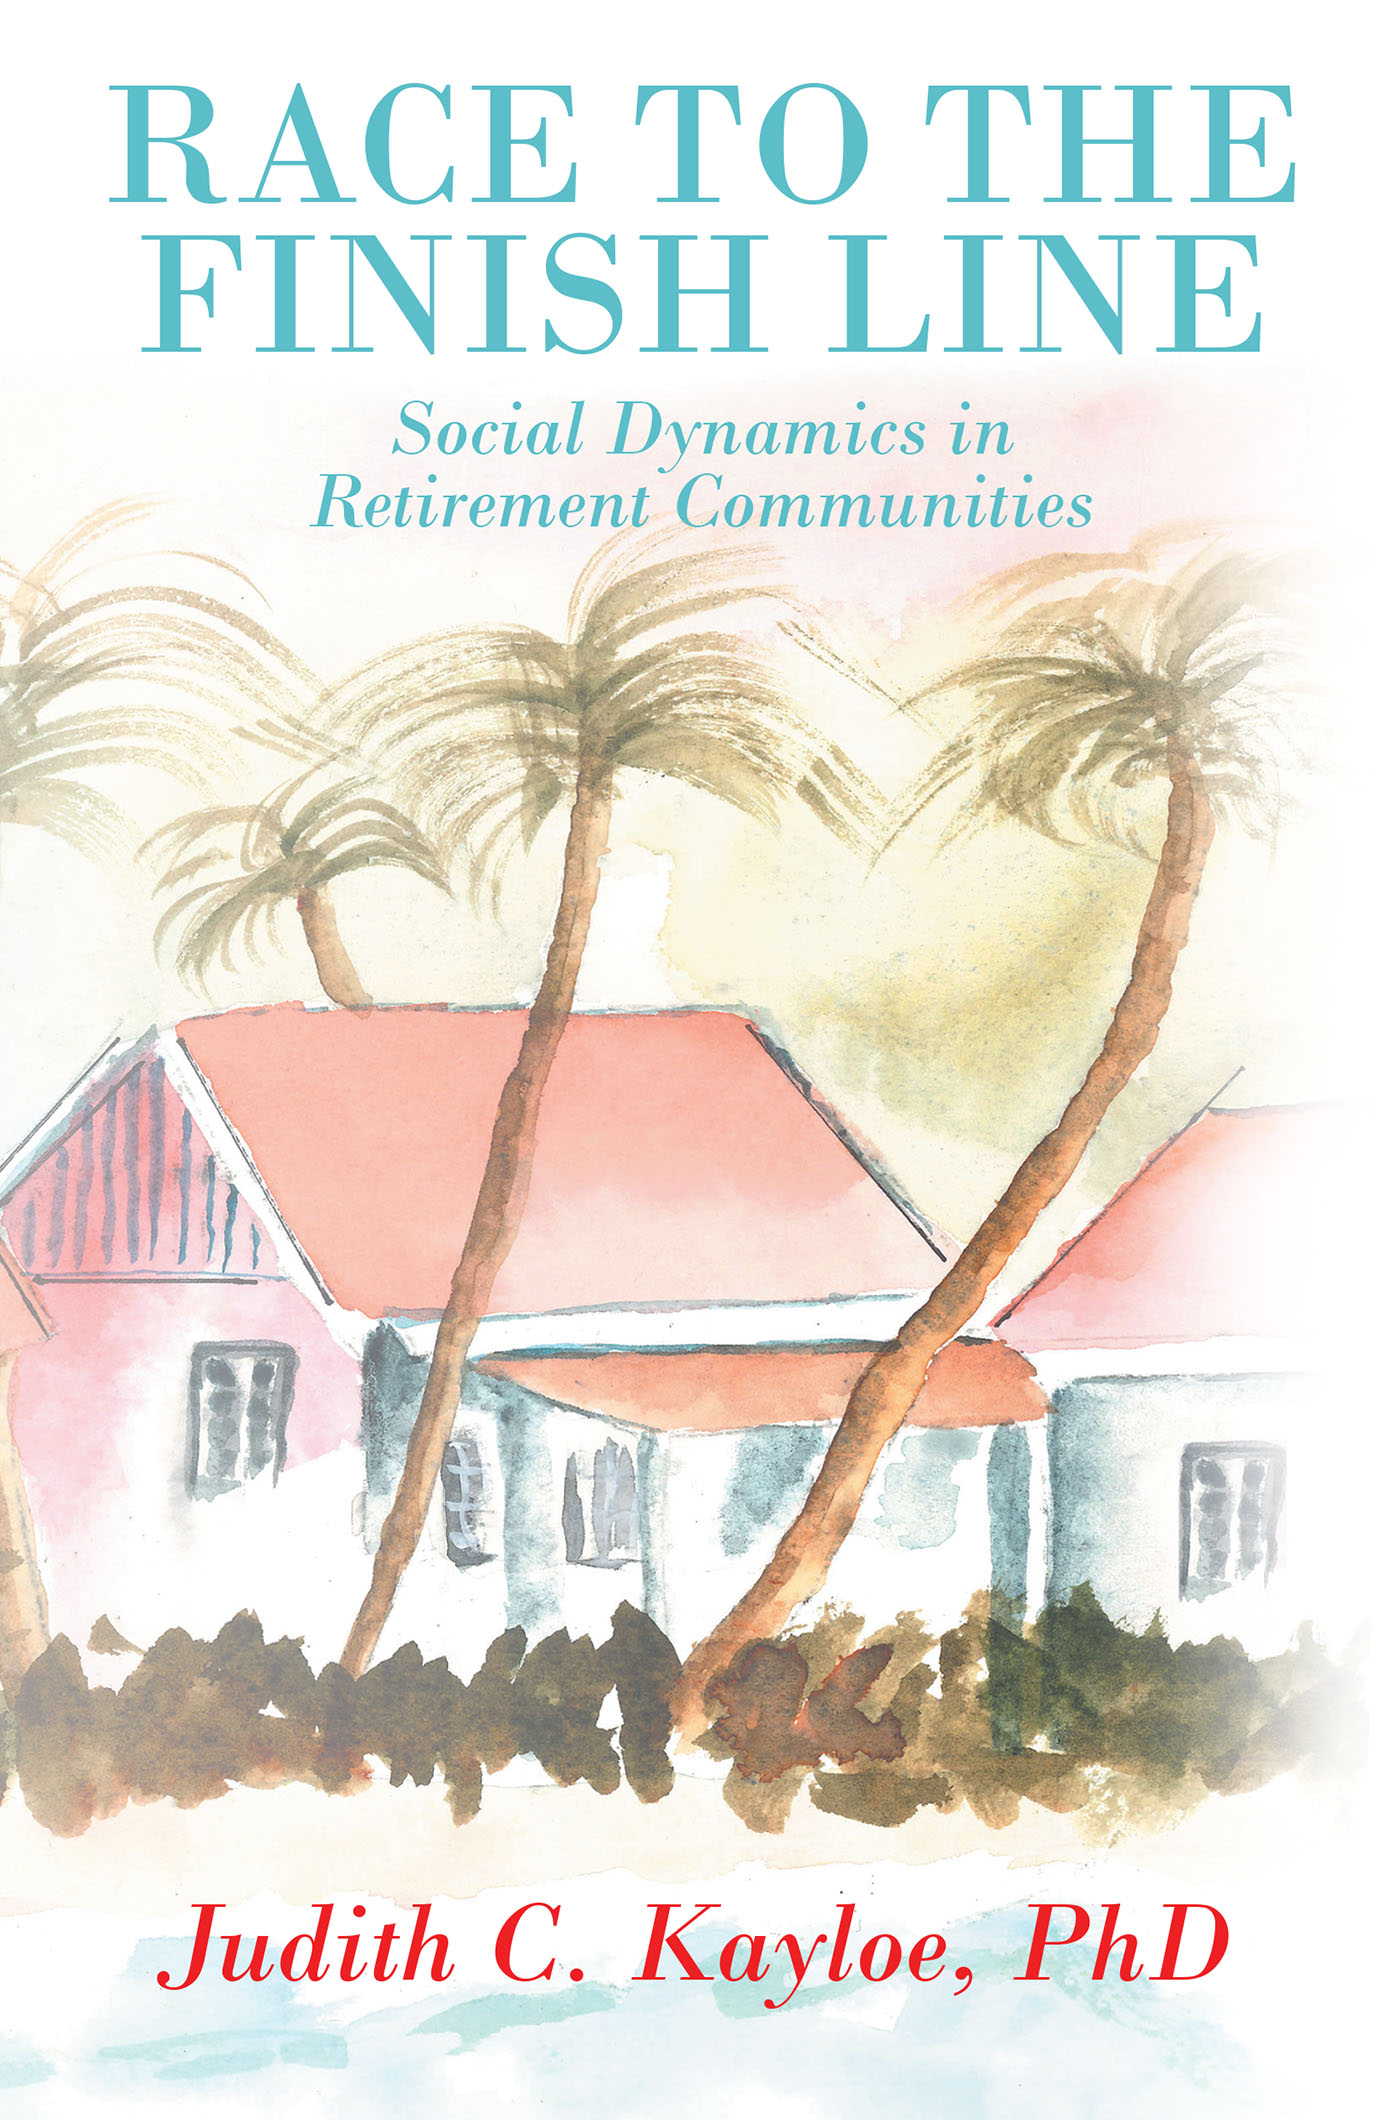 Author Judith C. Kayloe, PhD’s New Book “Race to the Finish Line: Social Dynamics in Retirement Communities” Pulls Back the Curtain on the Truths Behind the Retired Life